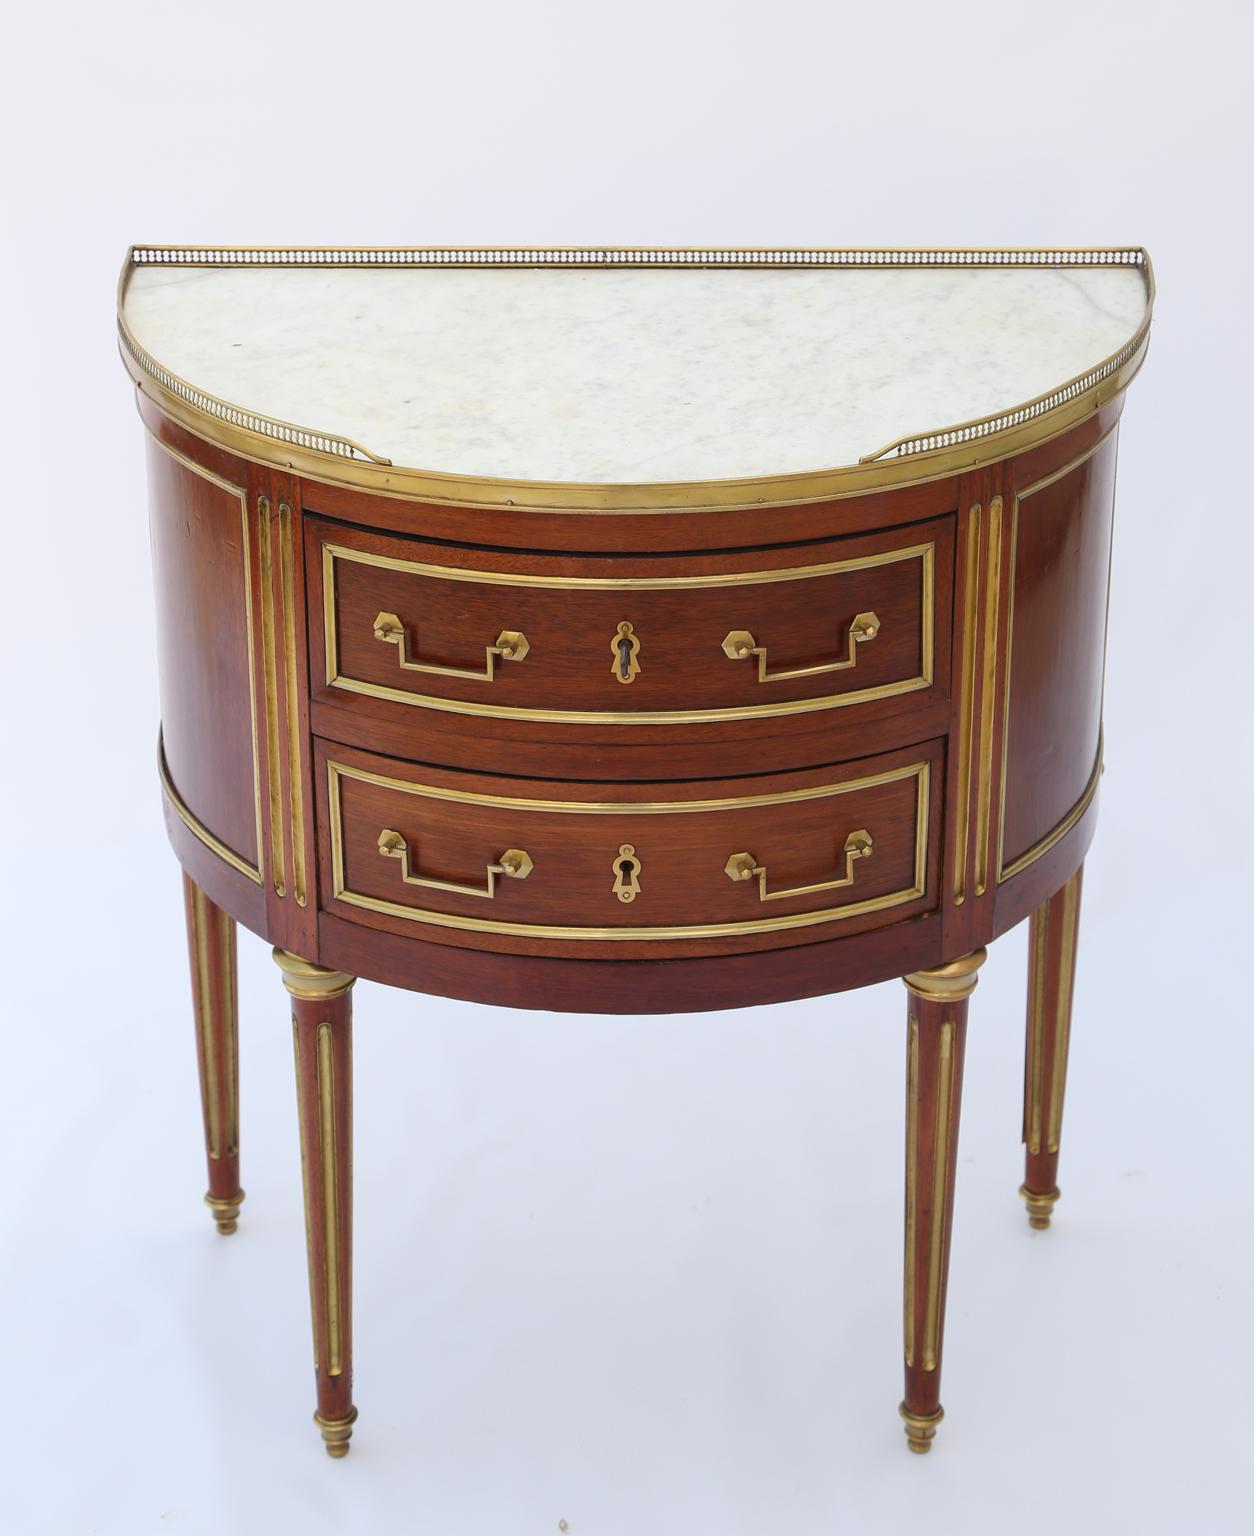 Demilune chest, having its original top of Carrara marble, surrounded by 3/4 pierced gallery, over double stacked drawers, its fielded front and sides framed in brass, raised on round, tapering, brass-inset fluted legs, ending in touipe feet.